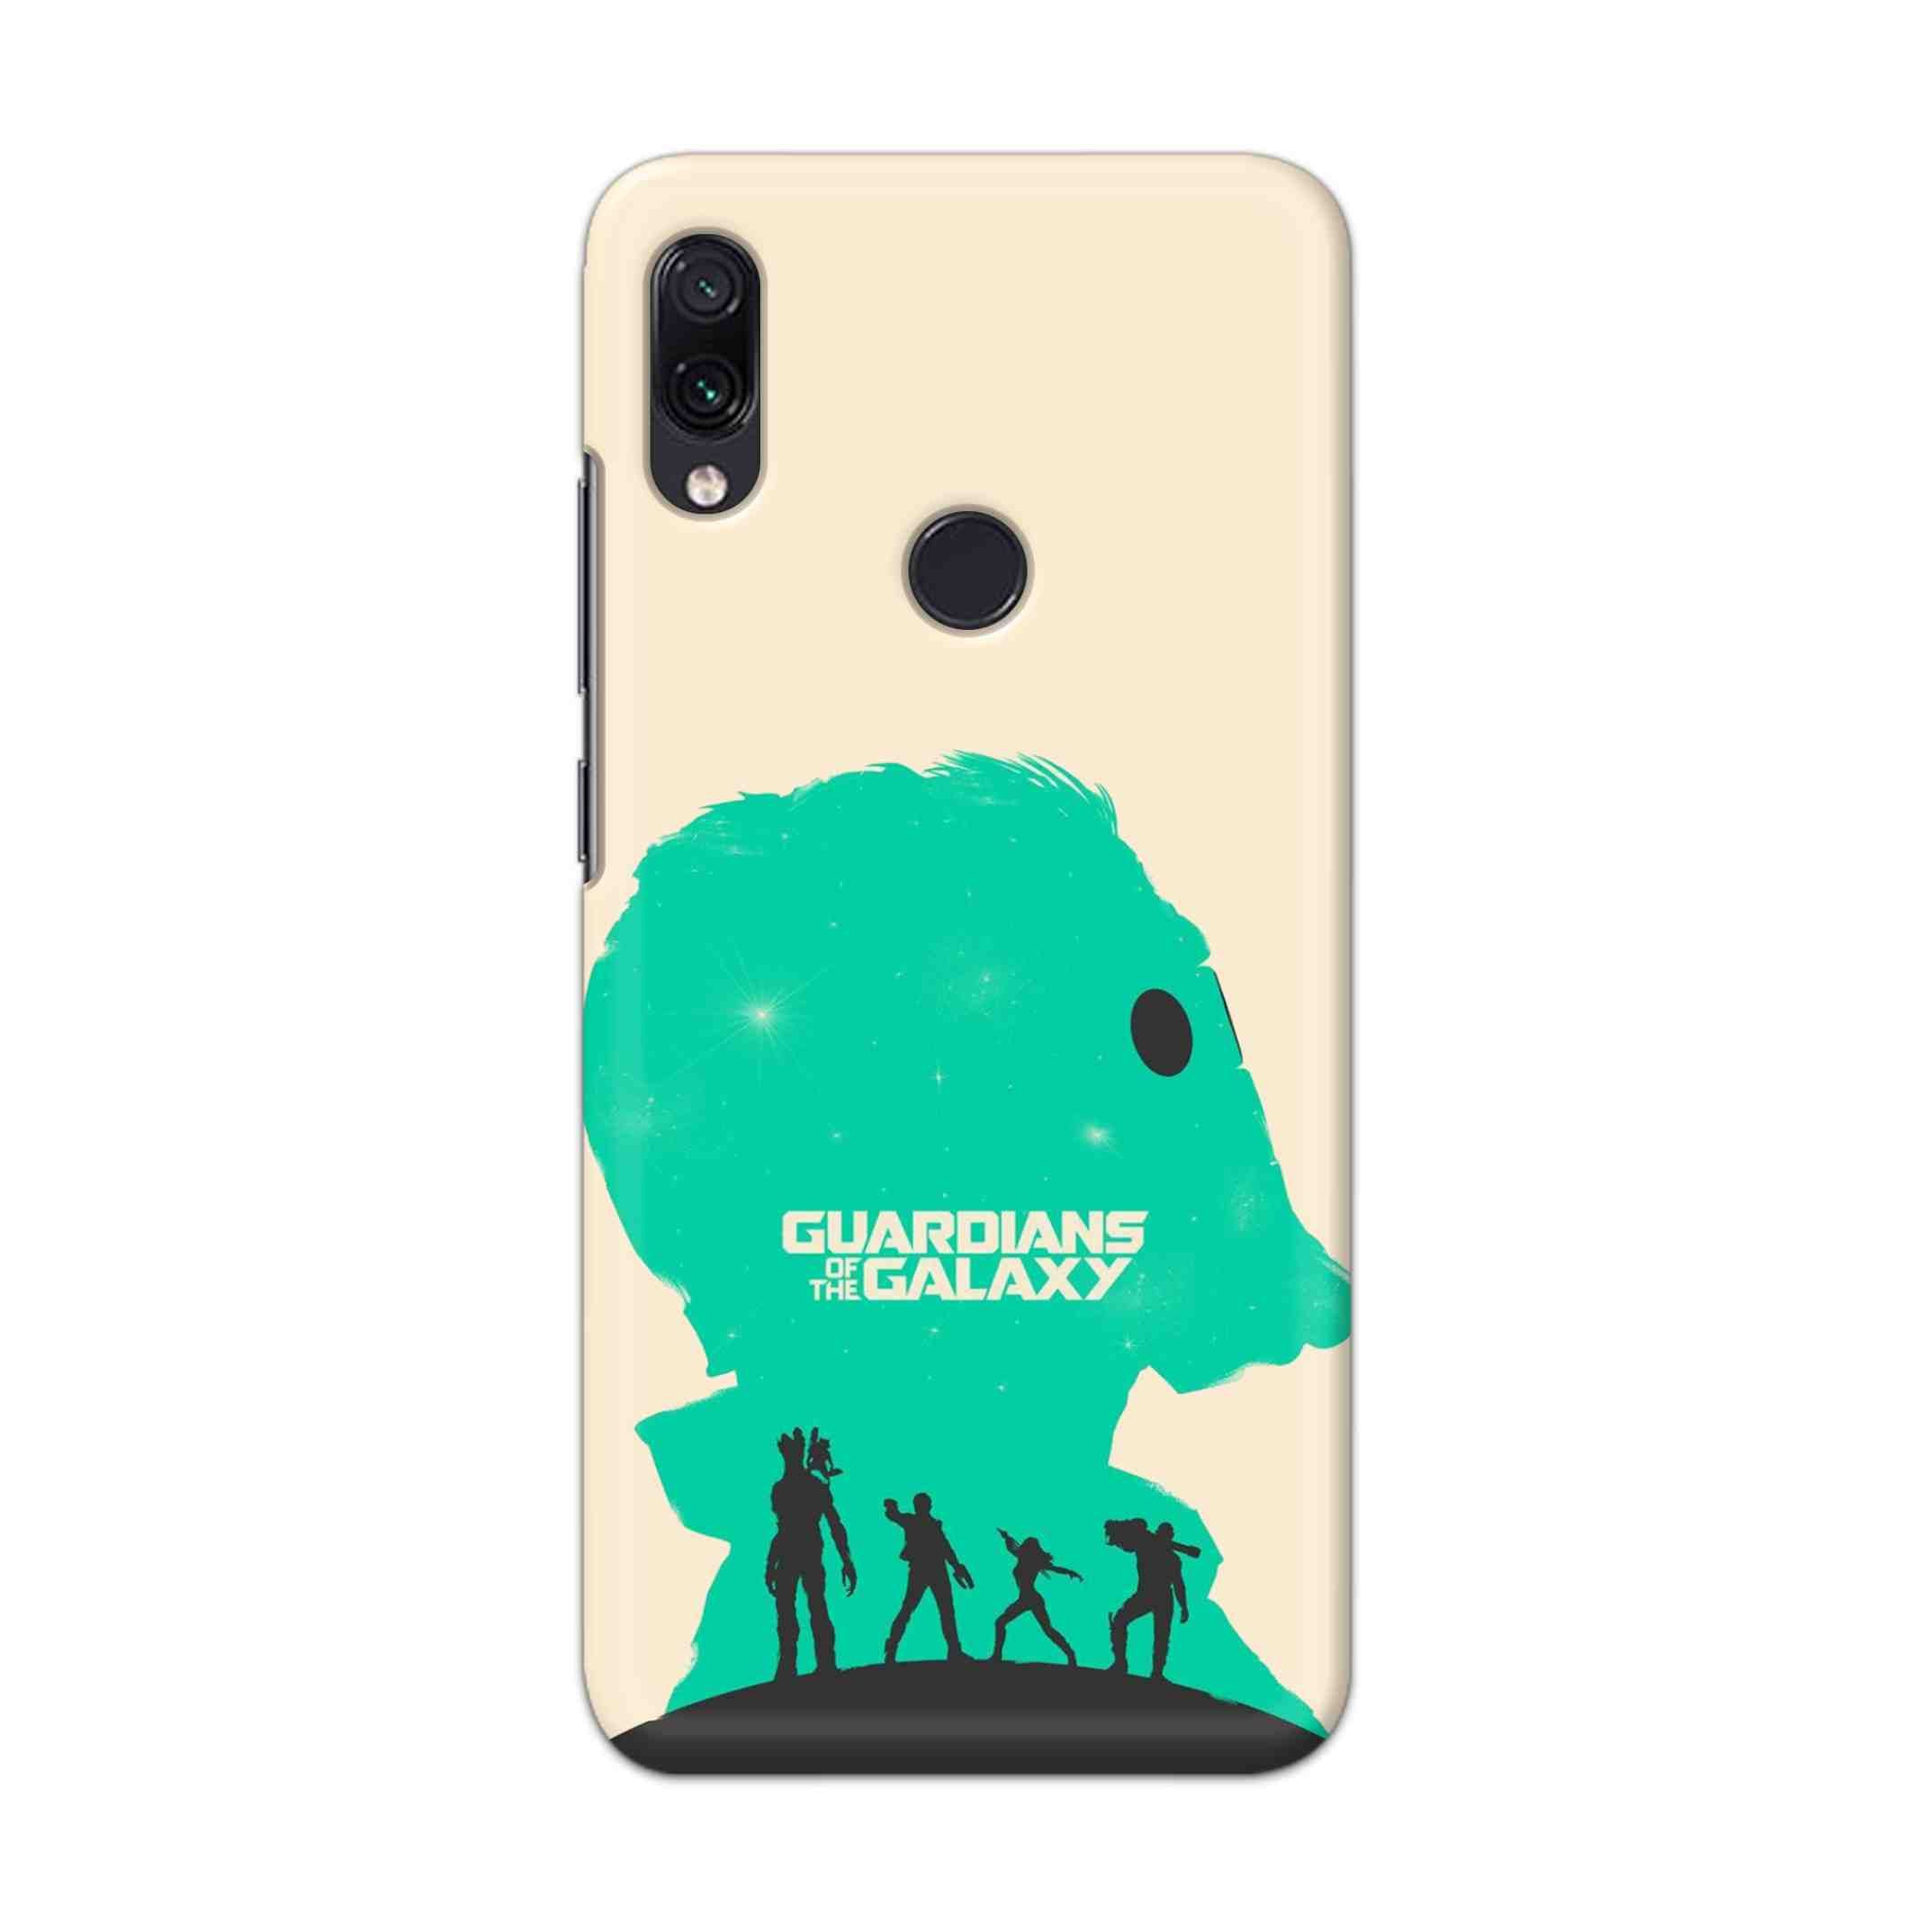 Buy Guardian Of The Galaxy Hard Back Mobile Phone Case Cover For Redmi Note 7 / Note 7 Pro Online